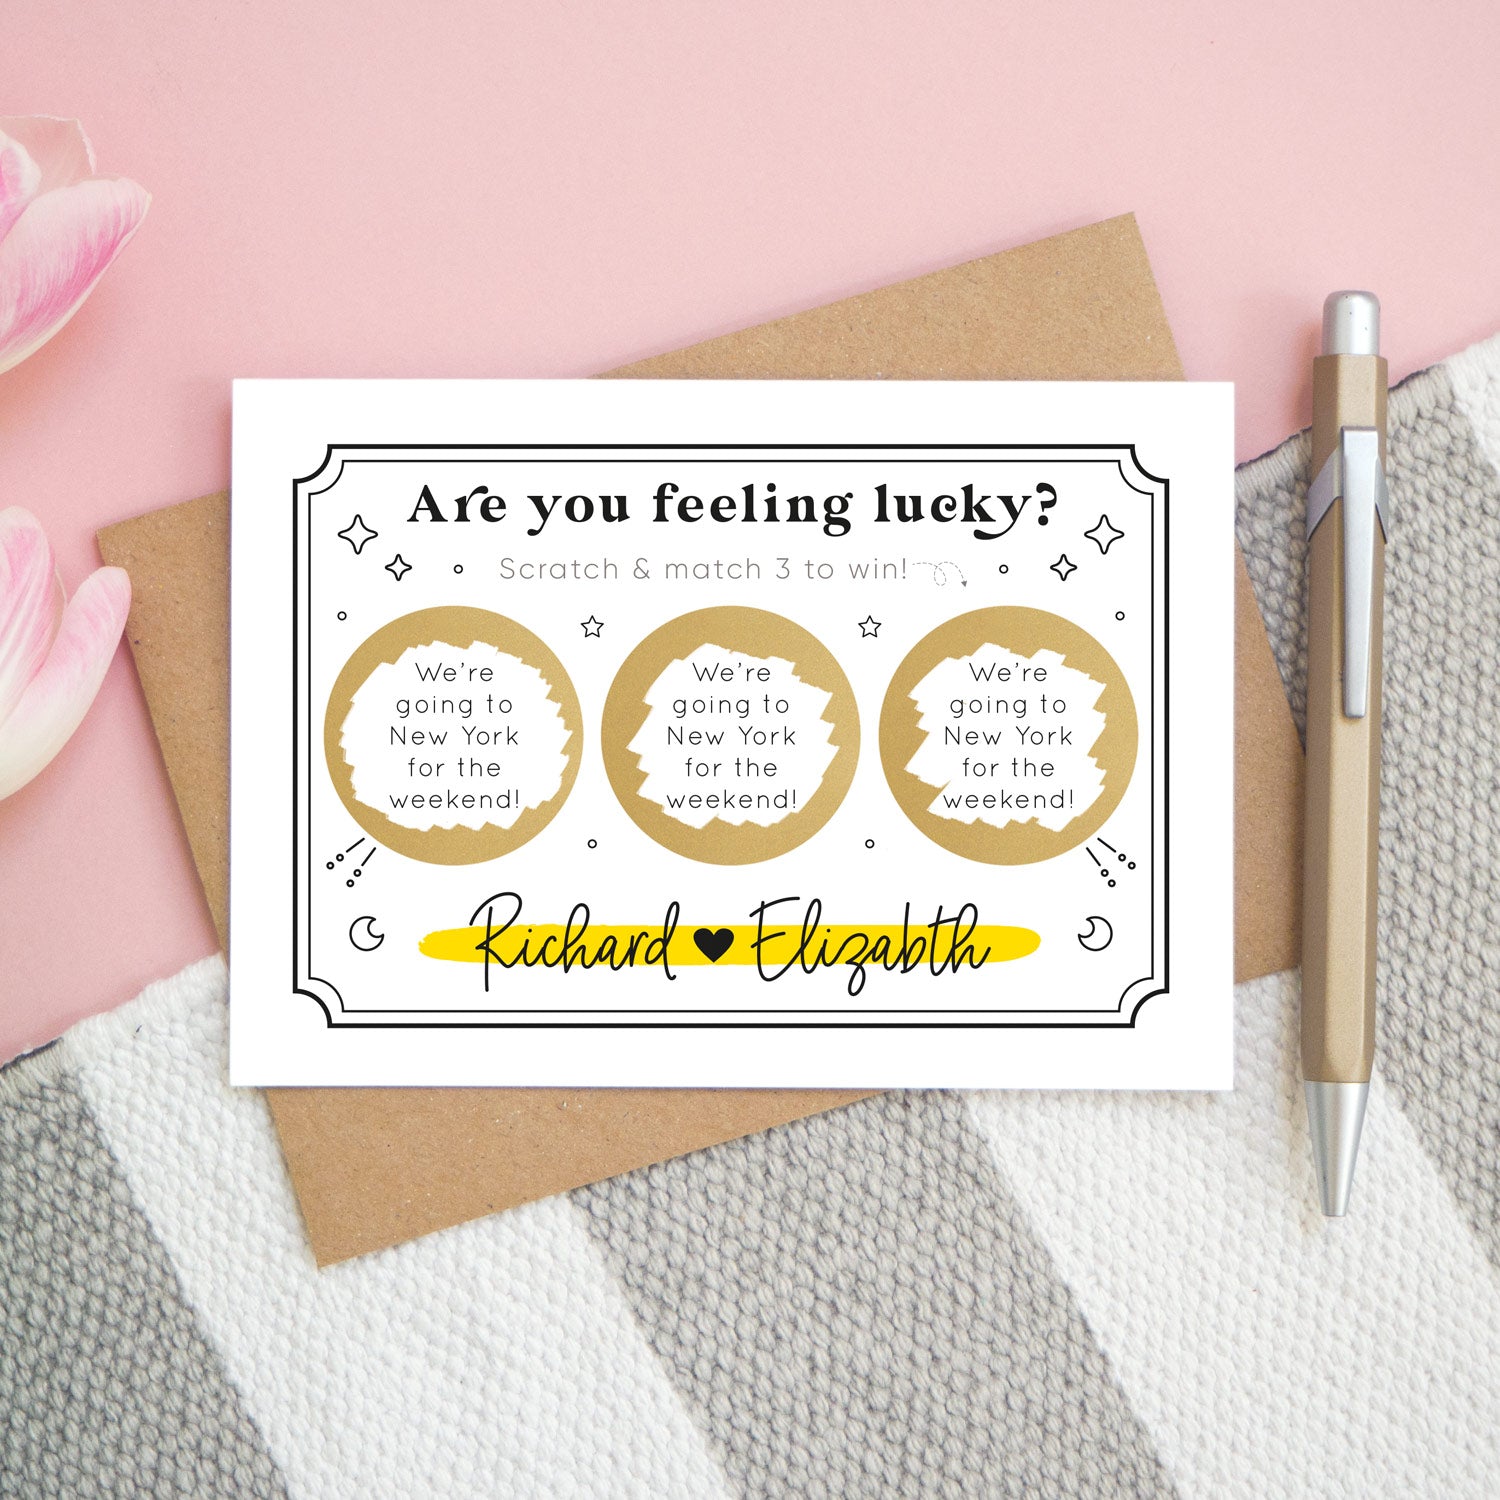 A personalised feeling lucky scratch card photographed on a pink and grey & white striped background with pink tulips poking in the side and a gold pen. The landscape scratch card sits on a kraft brown envelope. This card shows a celestial token style illustration in the black and yellow colour scheme with 3 golden circles which have been scratched off to reveal the winning message!